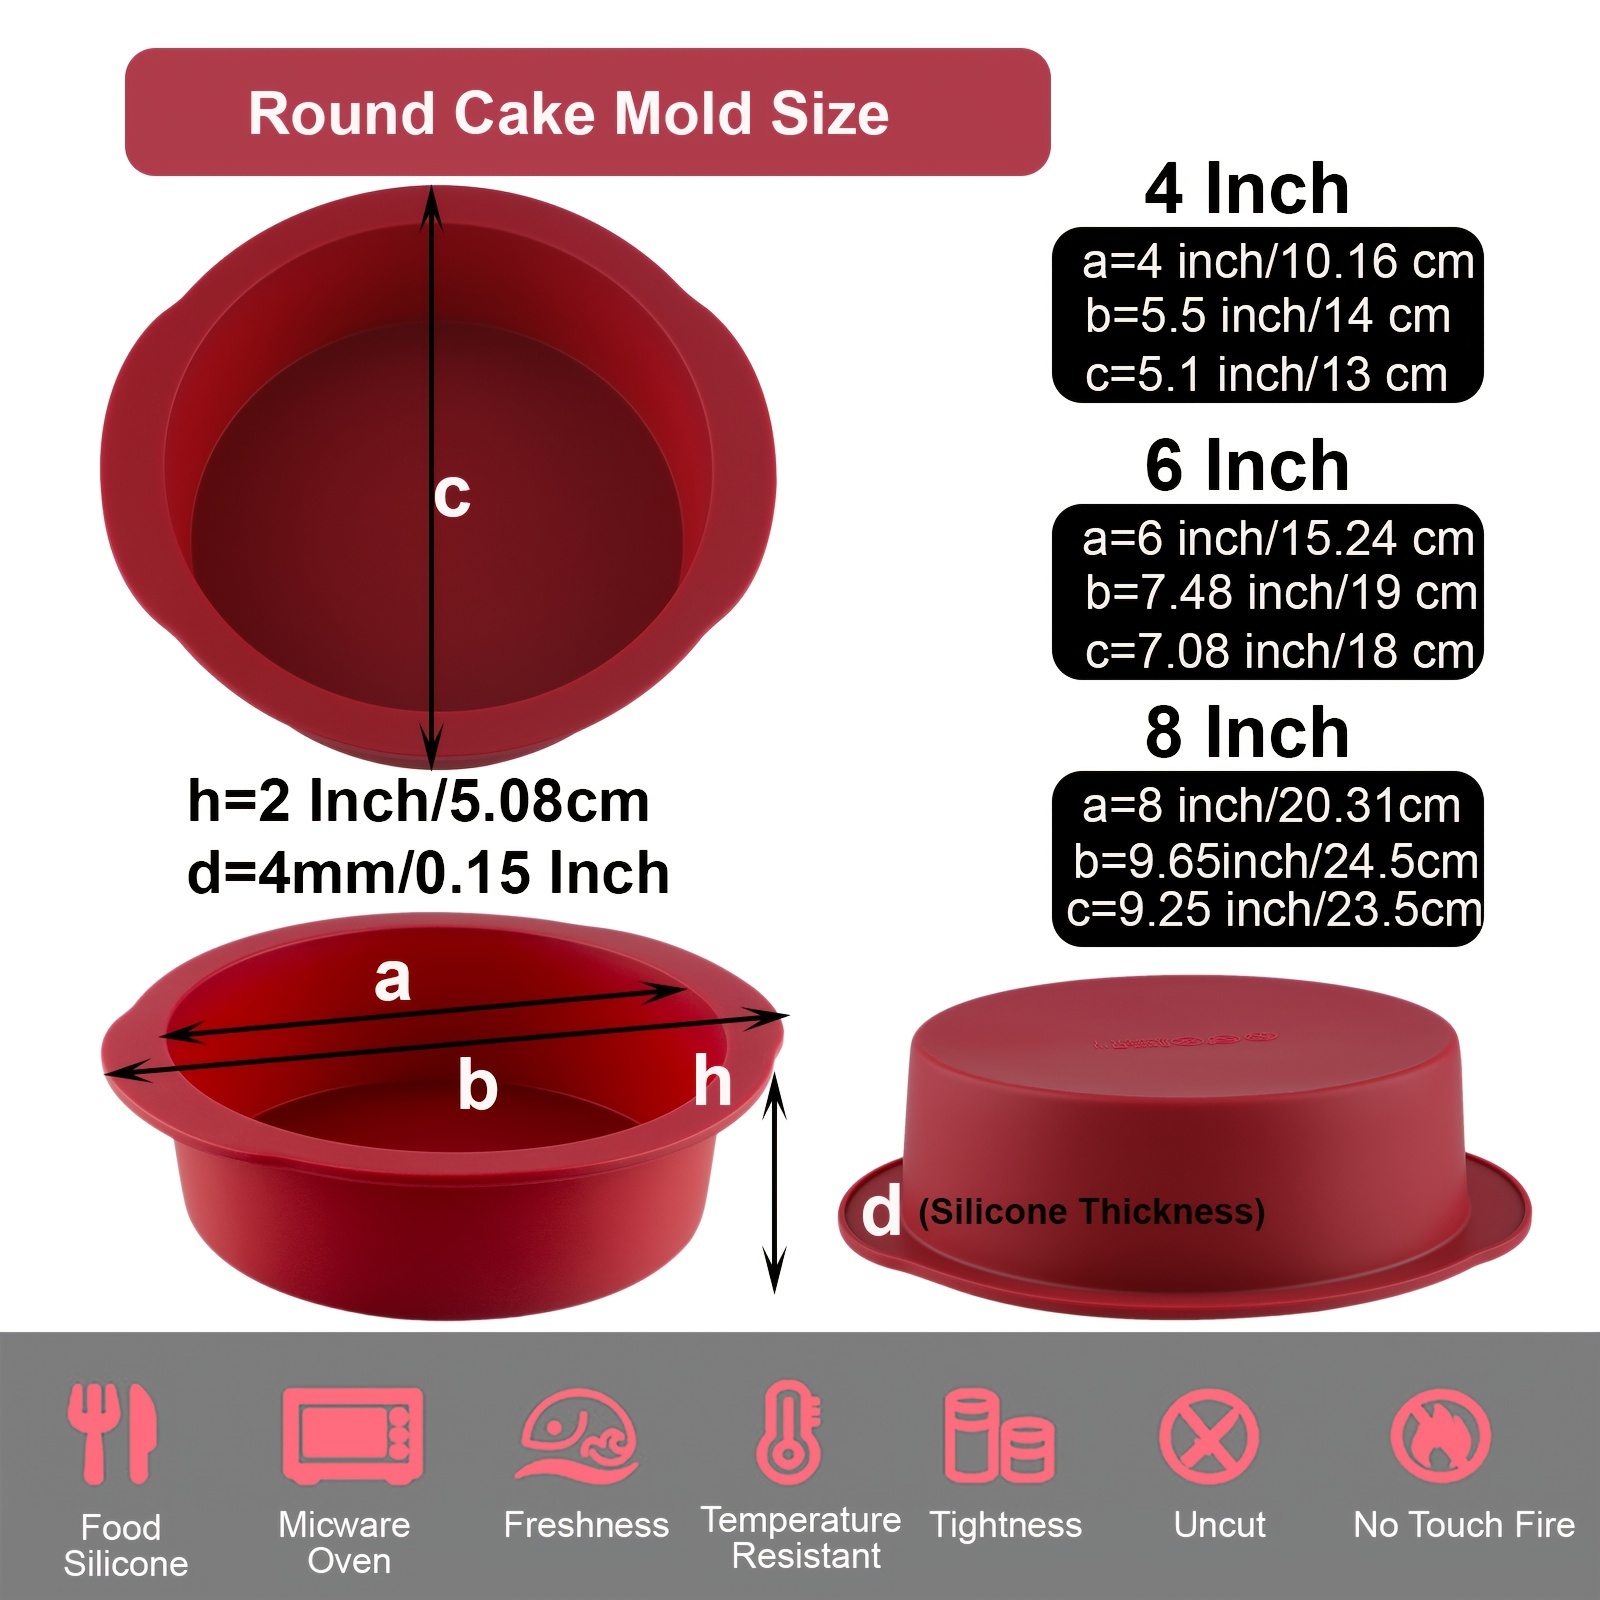 2pcs 8 inch Silicone Cake Pan for Baking, Round Cake Molds Silicone Baking Pan Non-Stick Quick Release Suitable for Cheesecake Chocolate Cake